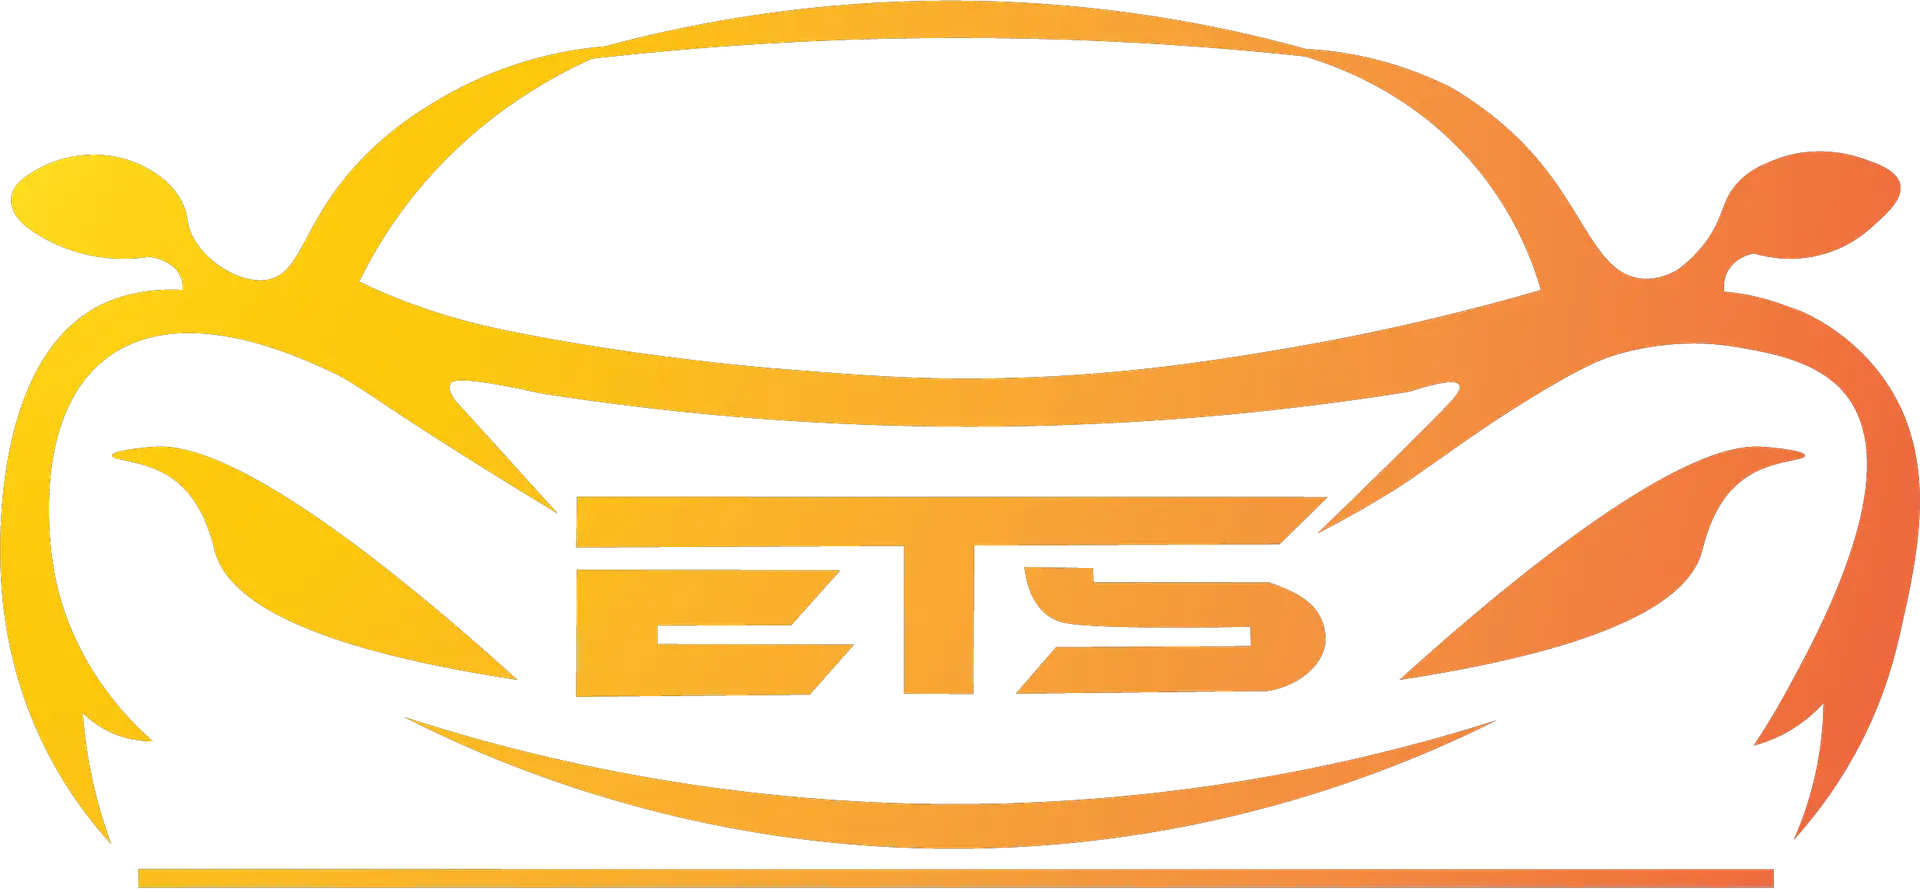 Logo of Exclusive Transportation Services featuring an abstract orange and yellow car design with "ETS" acronym.